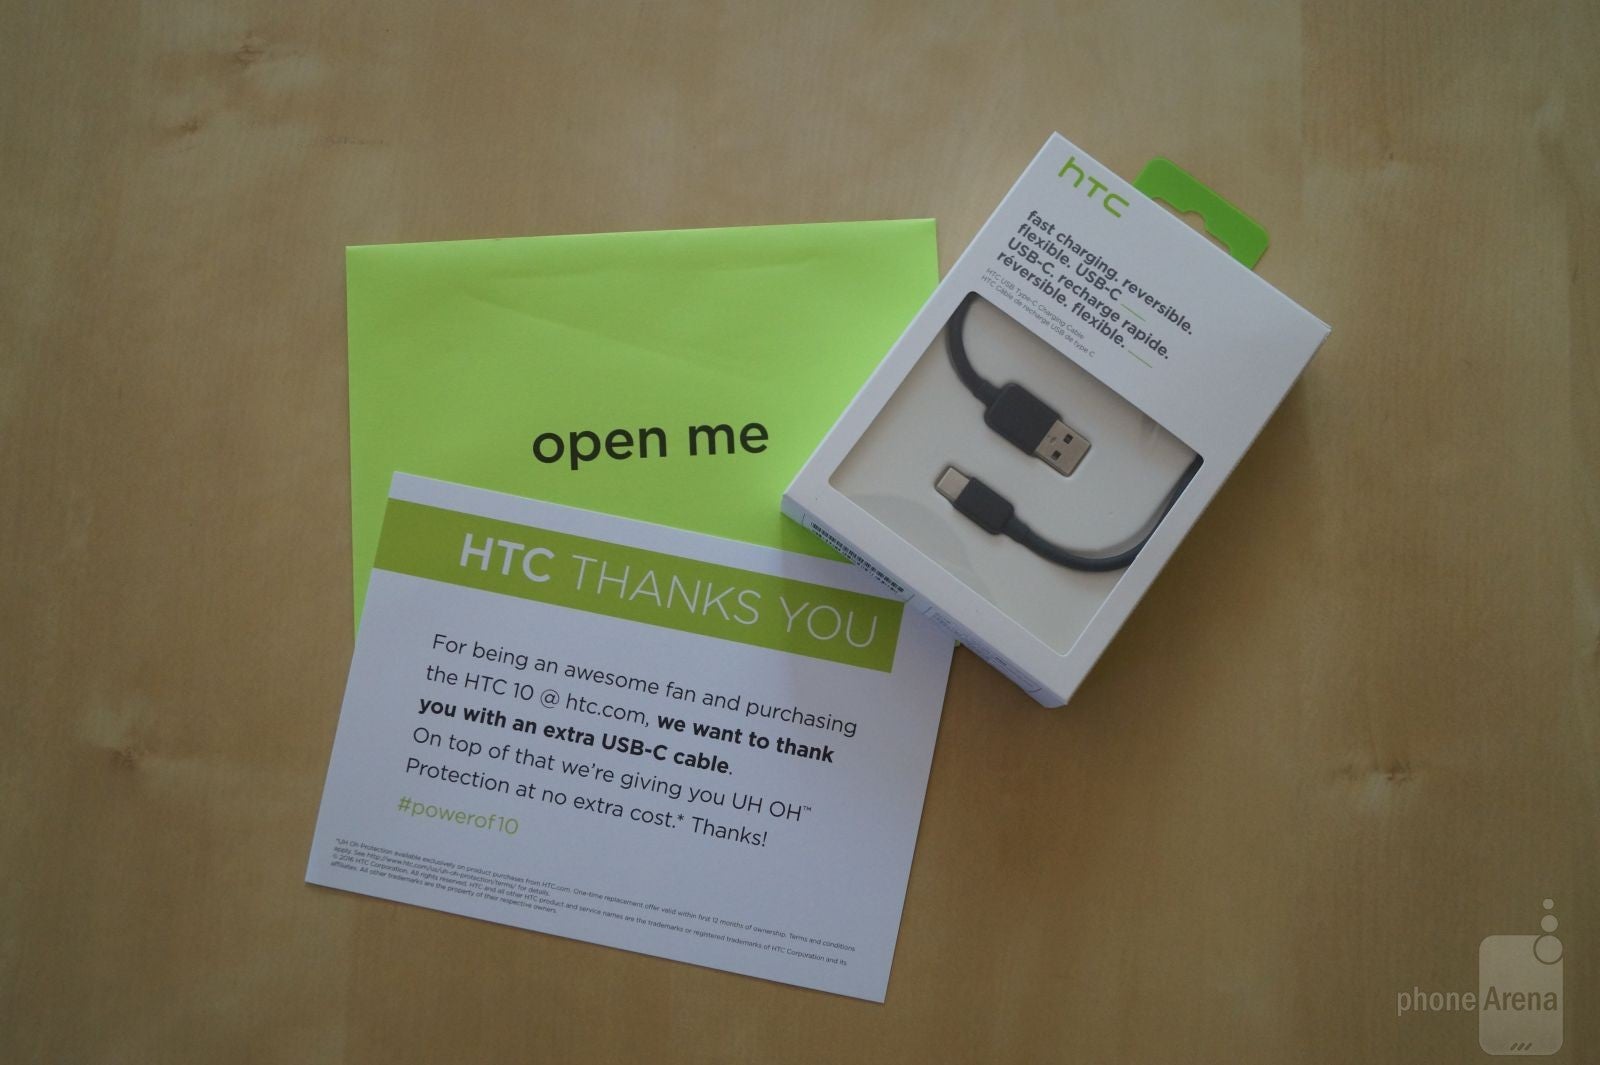 HTC 10 early adopters should be receiving their "thank you" gifts